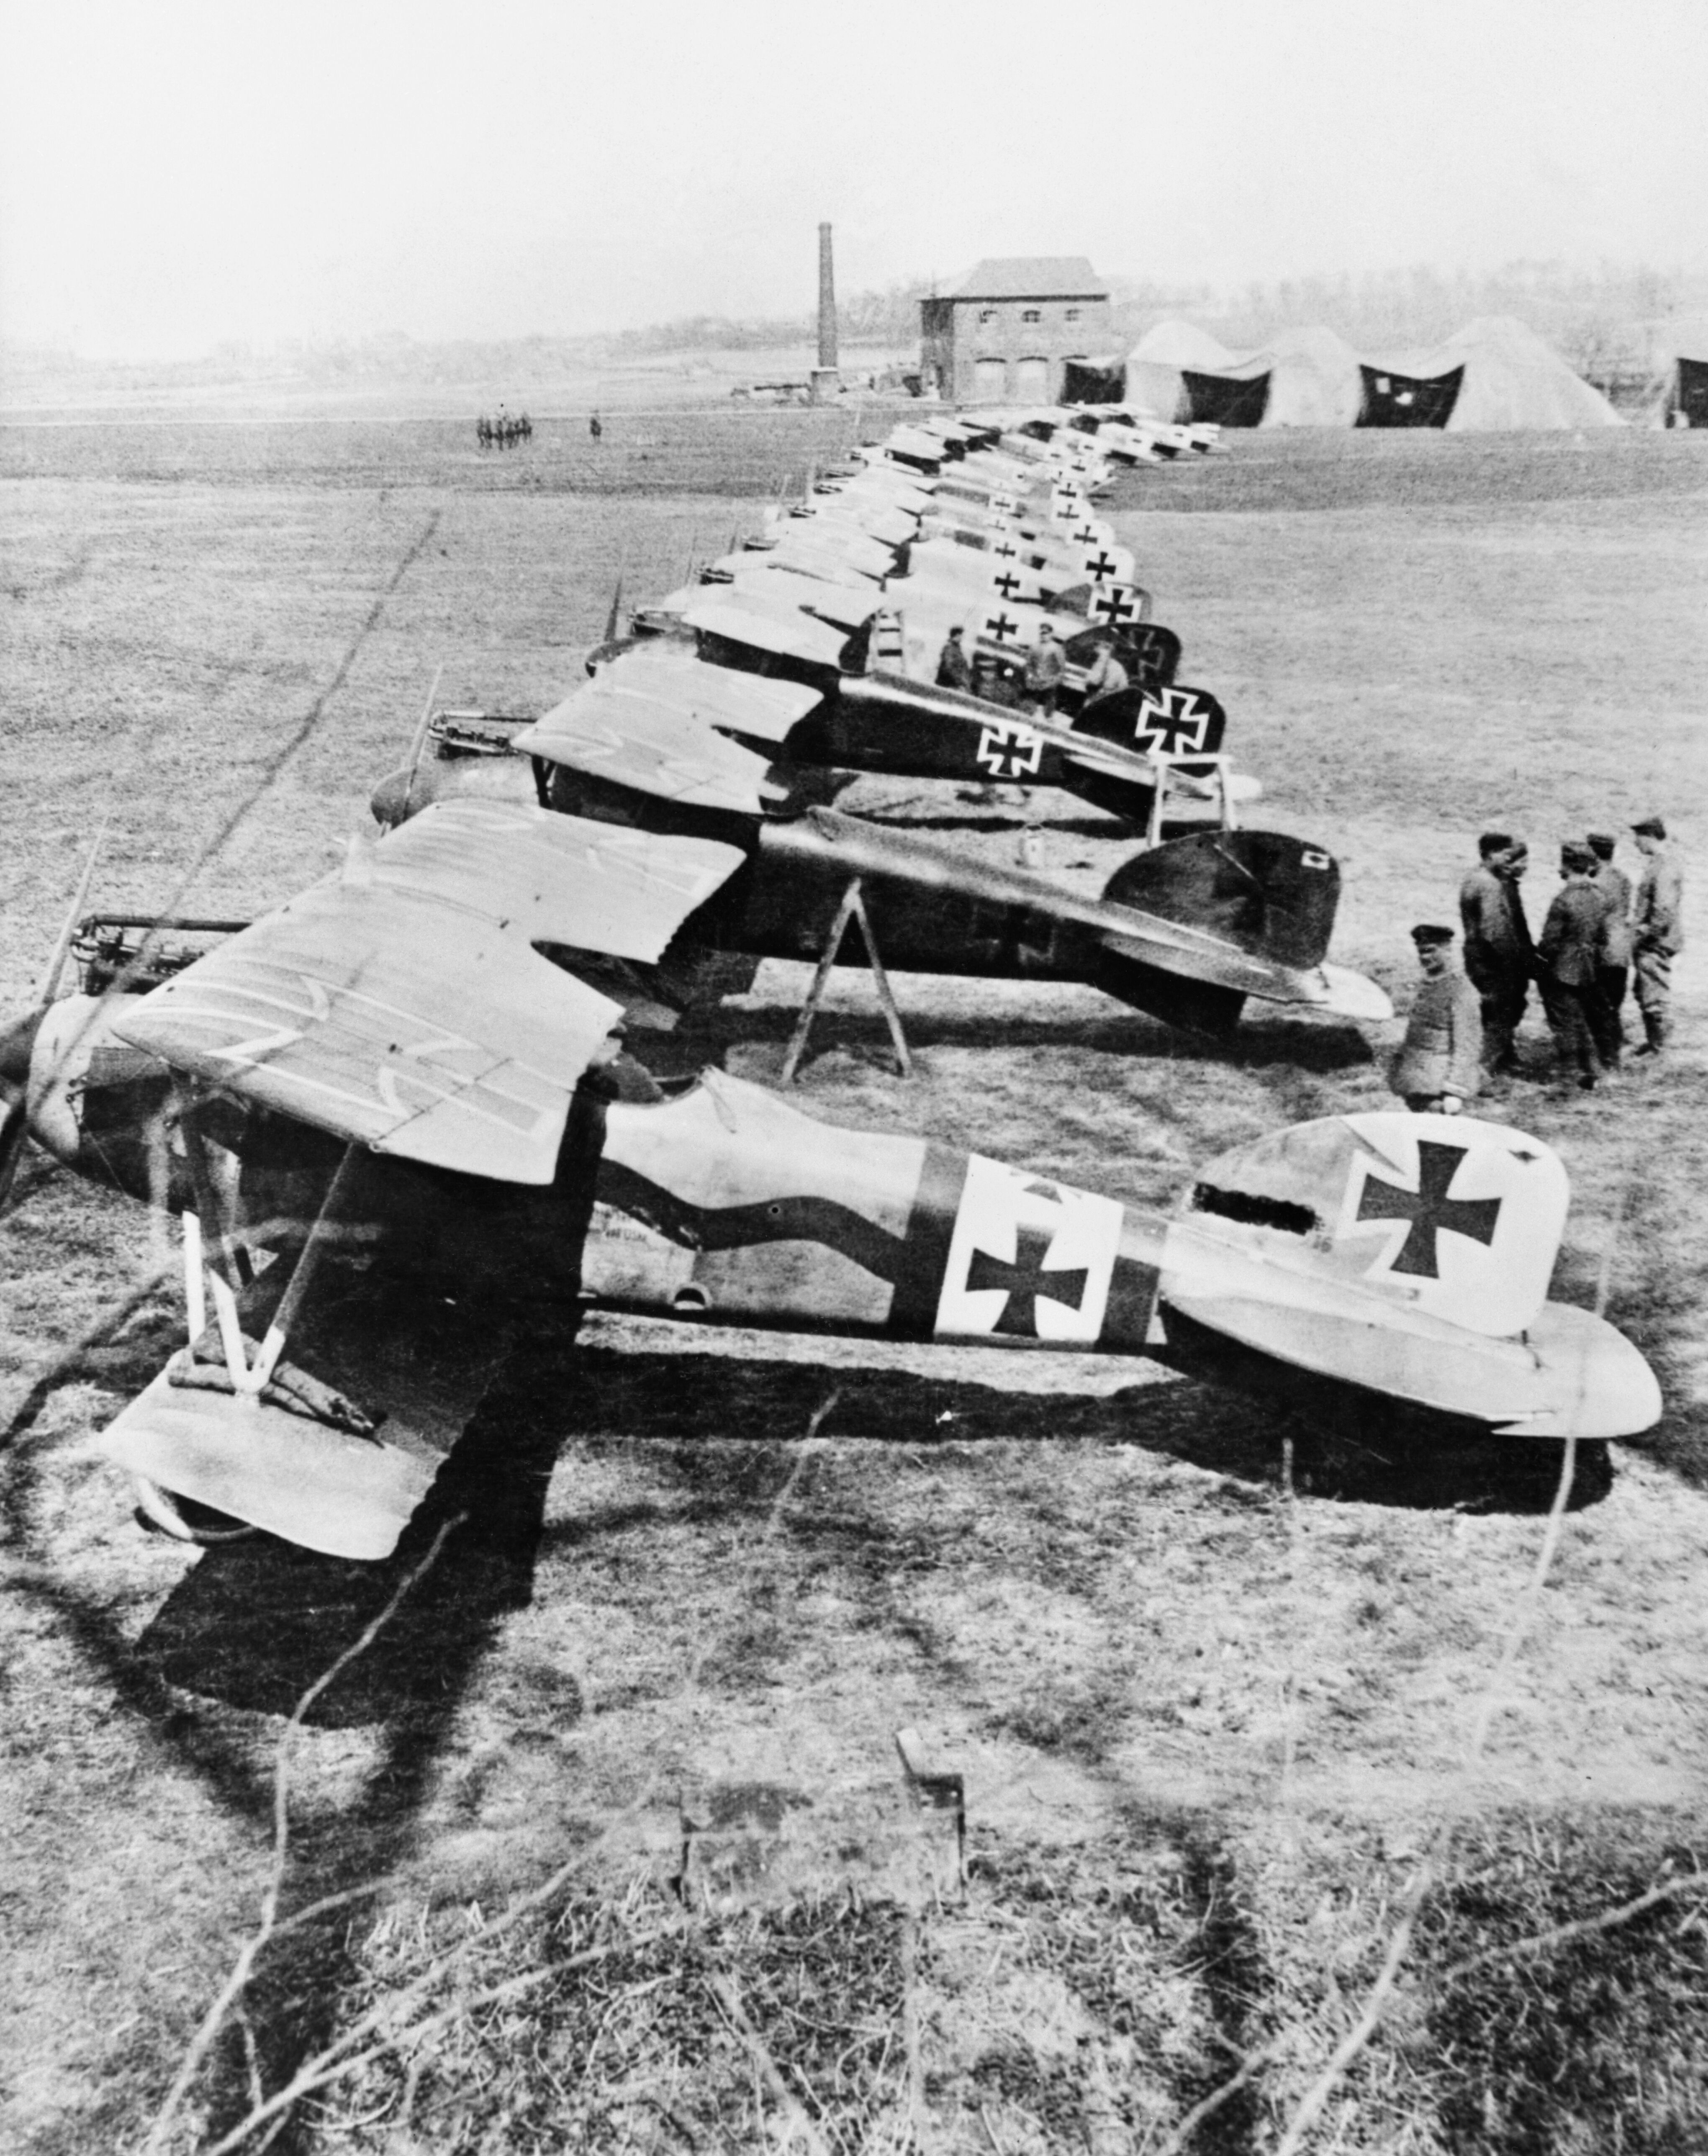 Several Albatros D.IIIs lined up in a field.